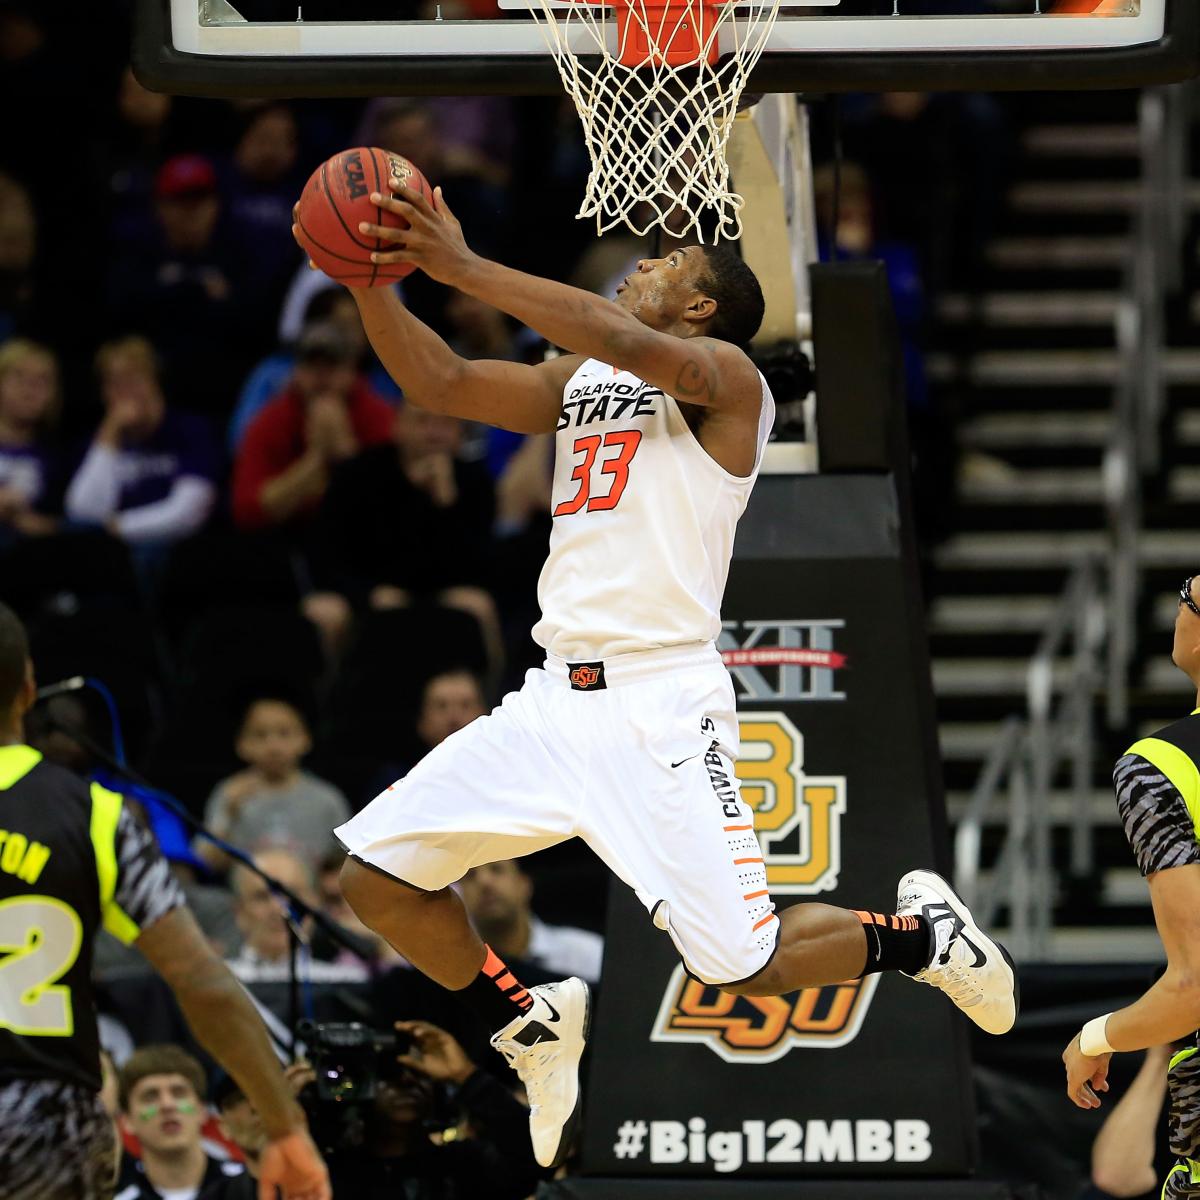 Oklahoma State Basketball: Complete Roster Season Preview for 2013 14